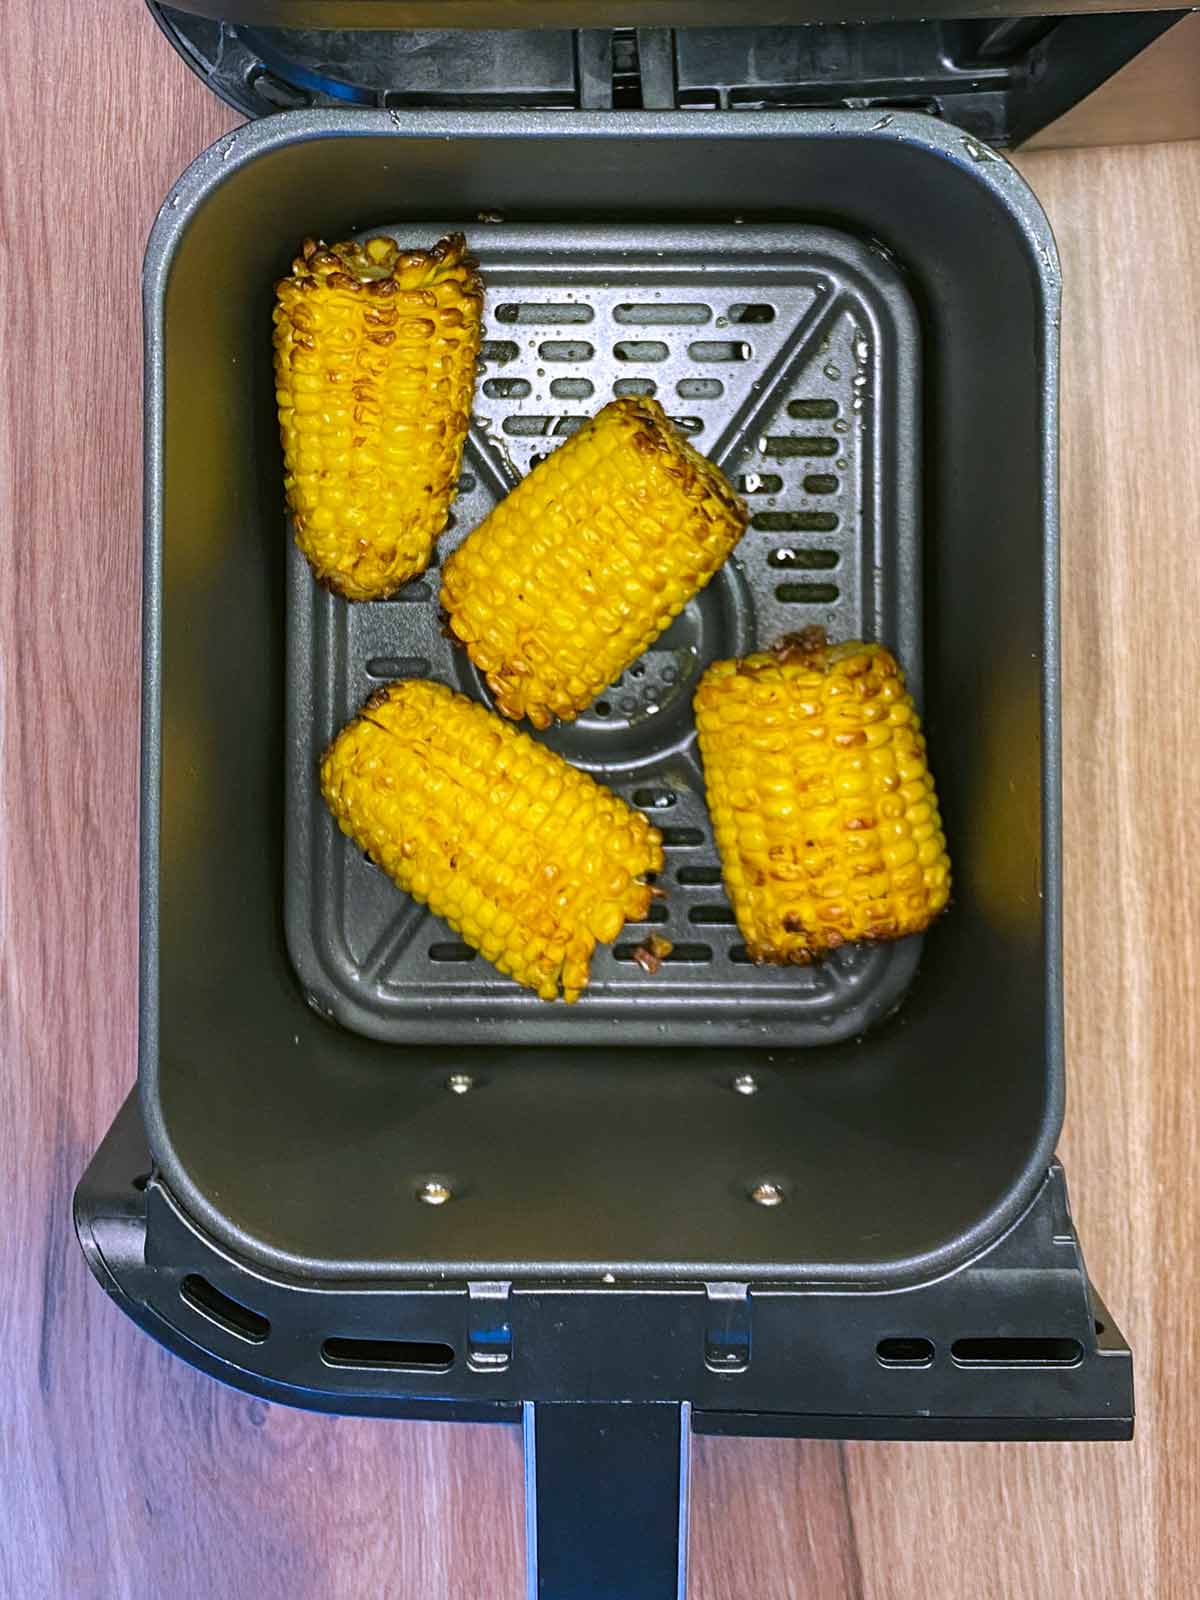 Four cooked corn cobs in an air fryer basket.